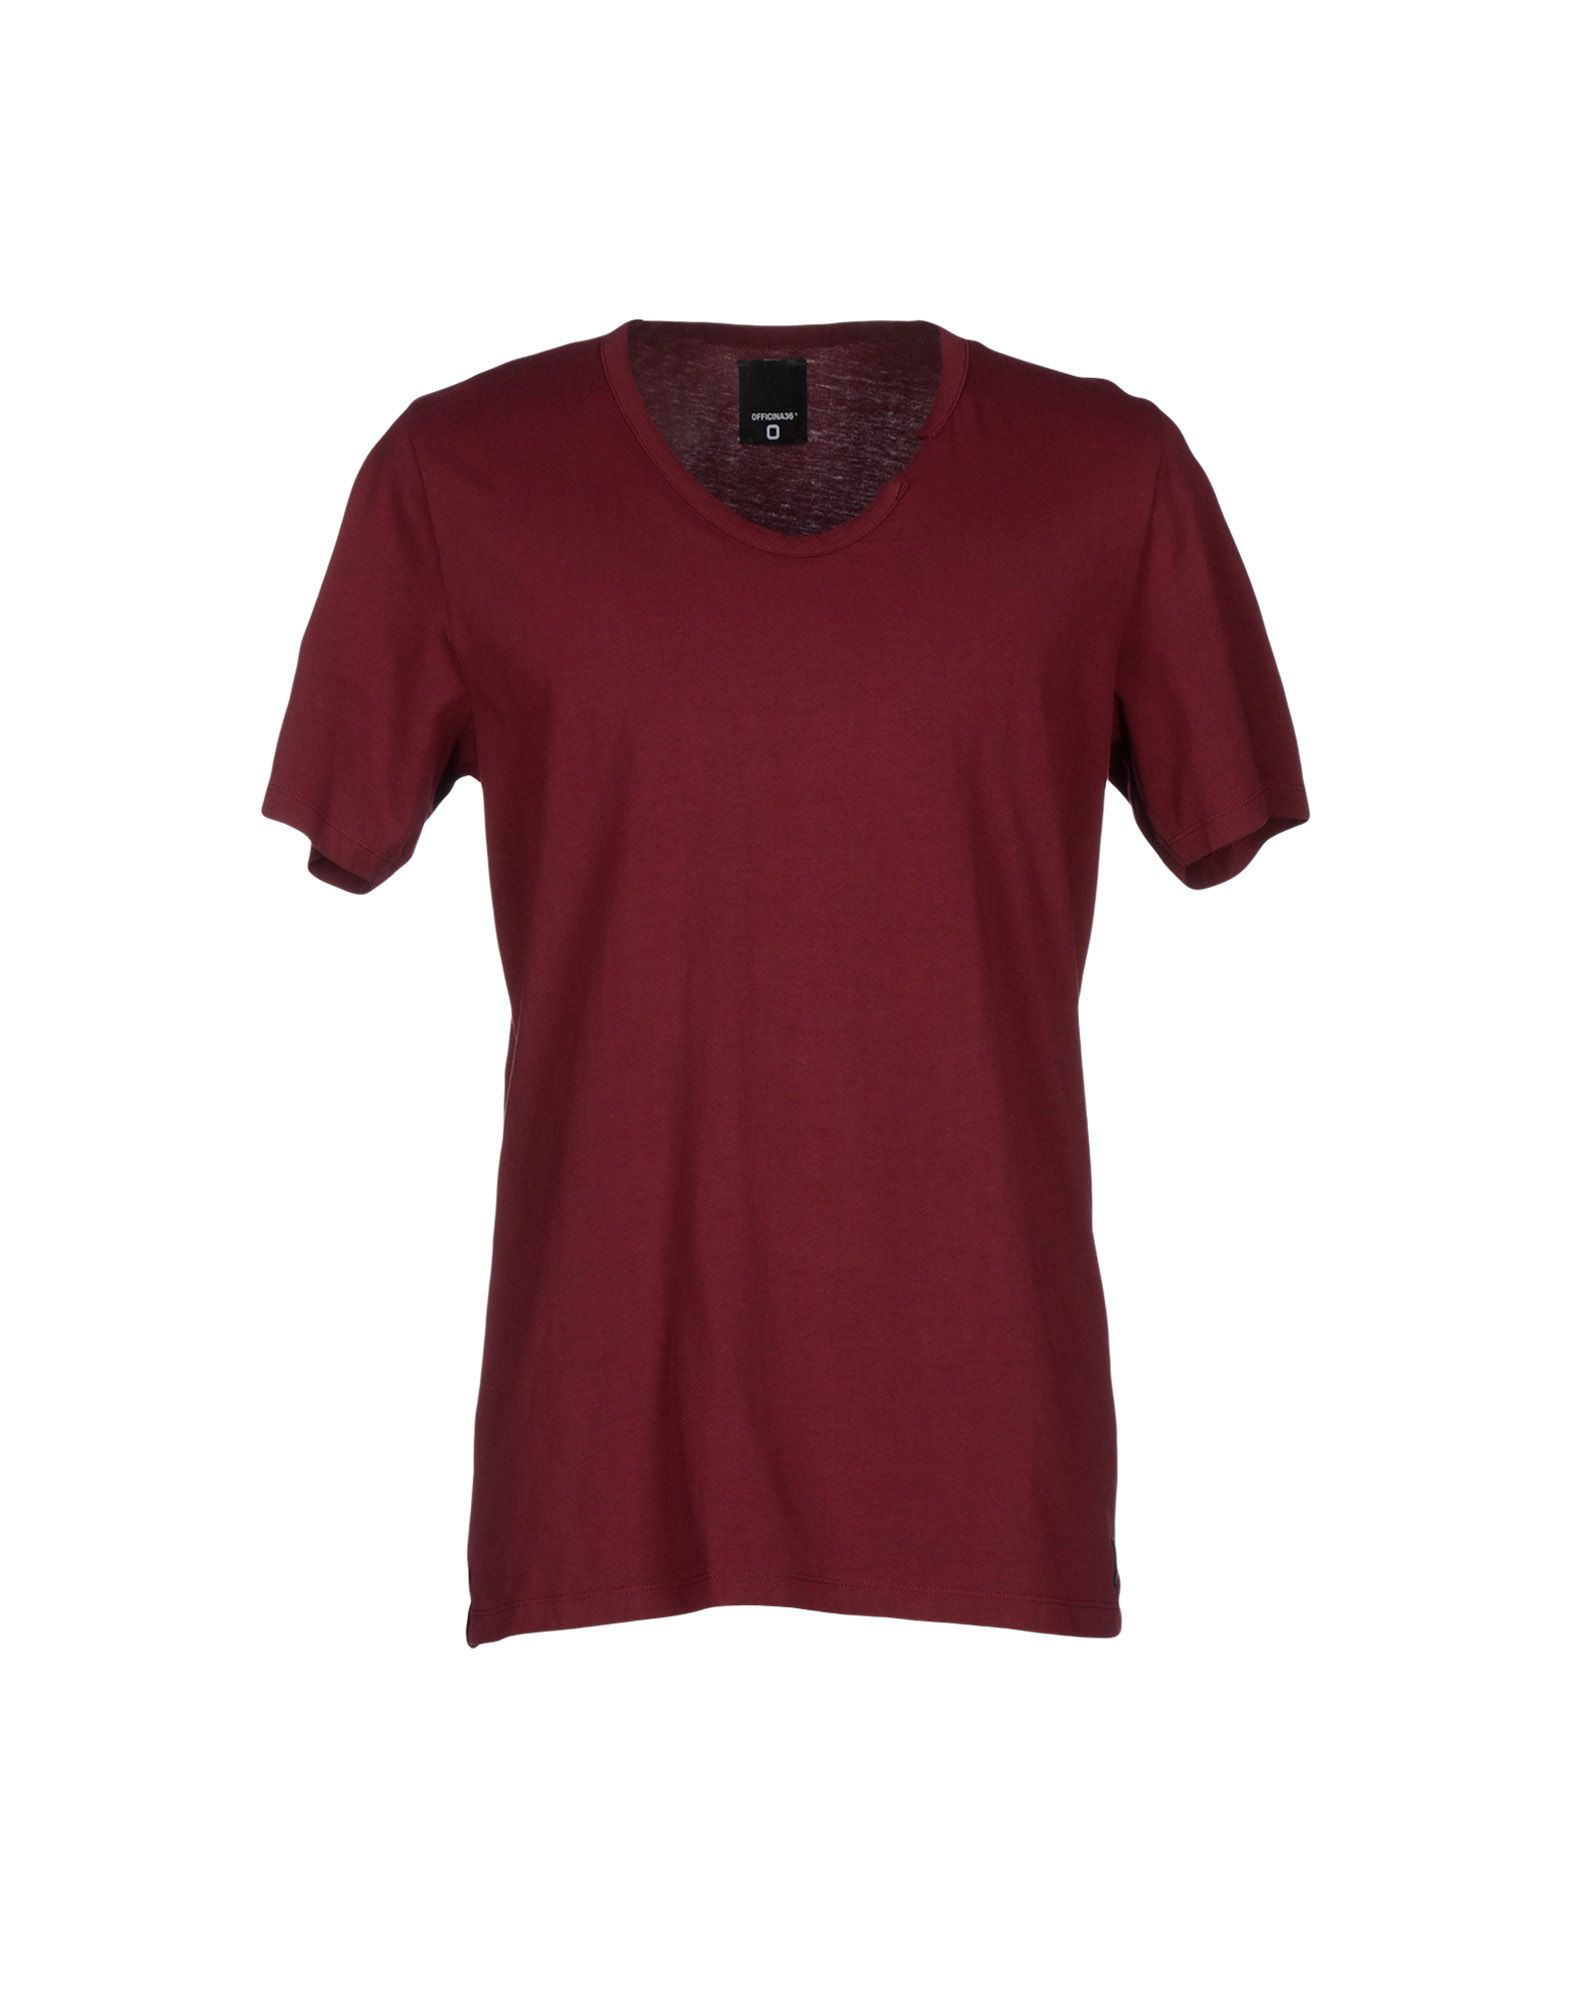 Lyst - Officina 36 T-shirt in Red for Men